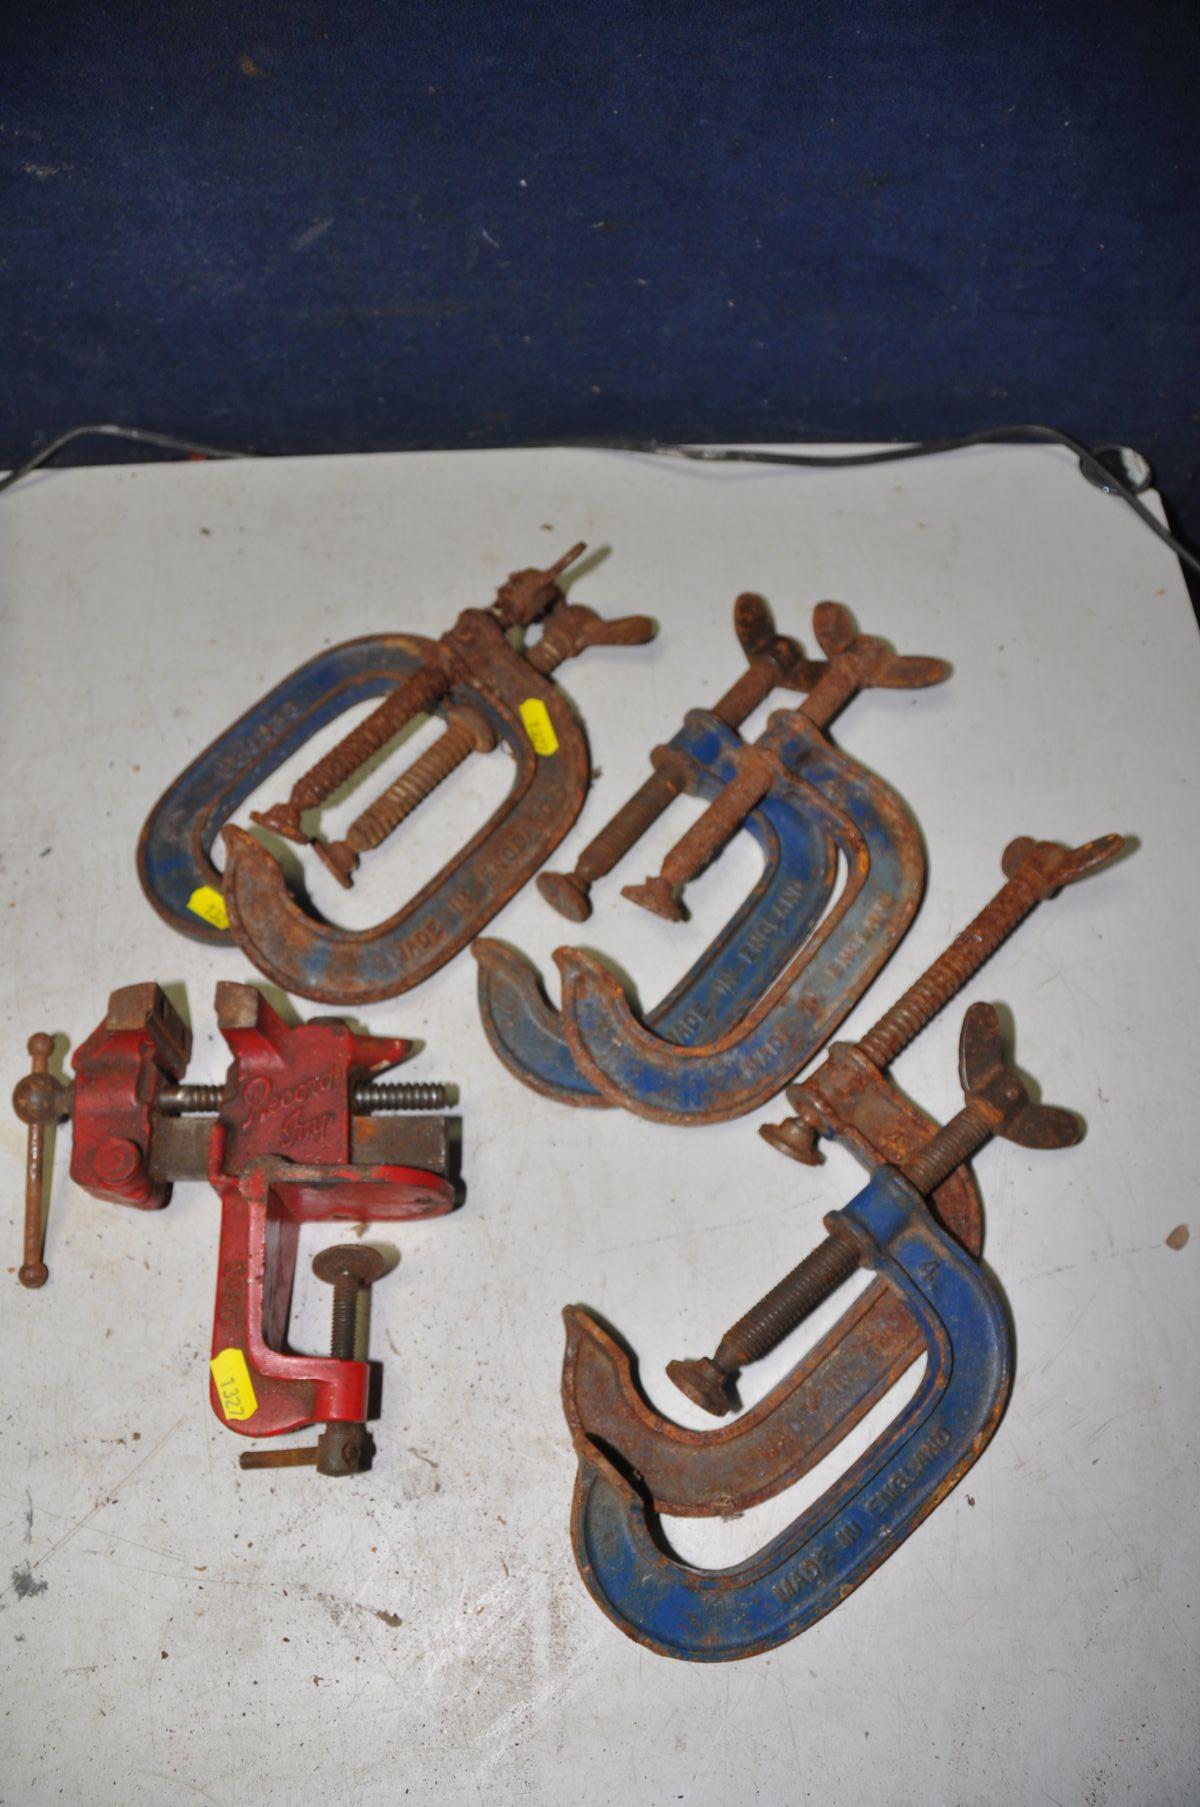 SIX RECORD No4 G-CLAMPS (some rust), along with a Record No80 vice